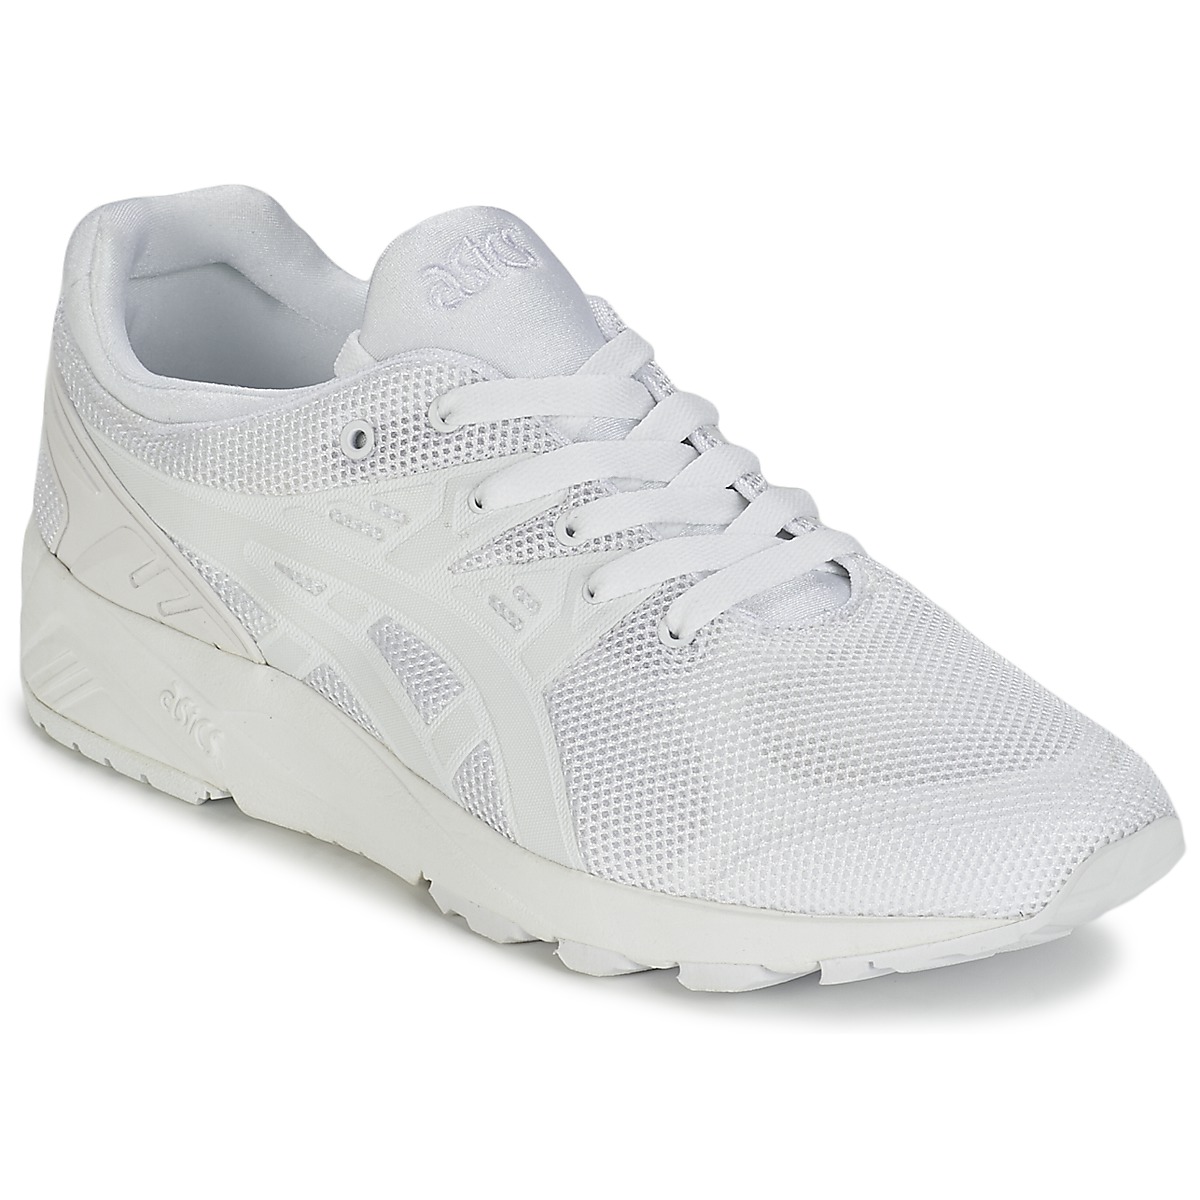 asics kayano homme blanche